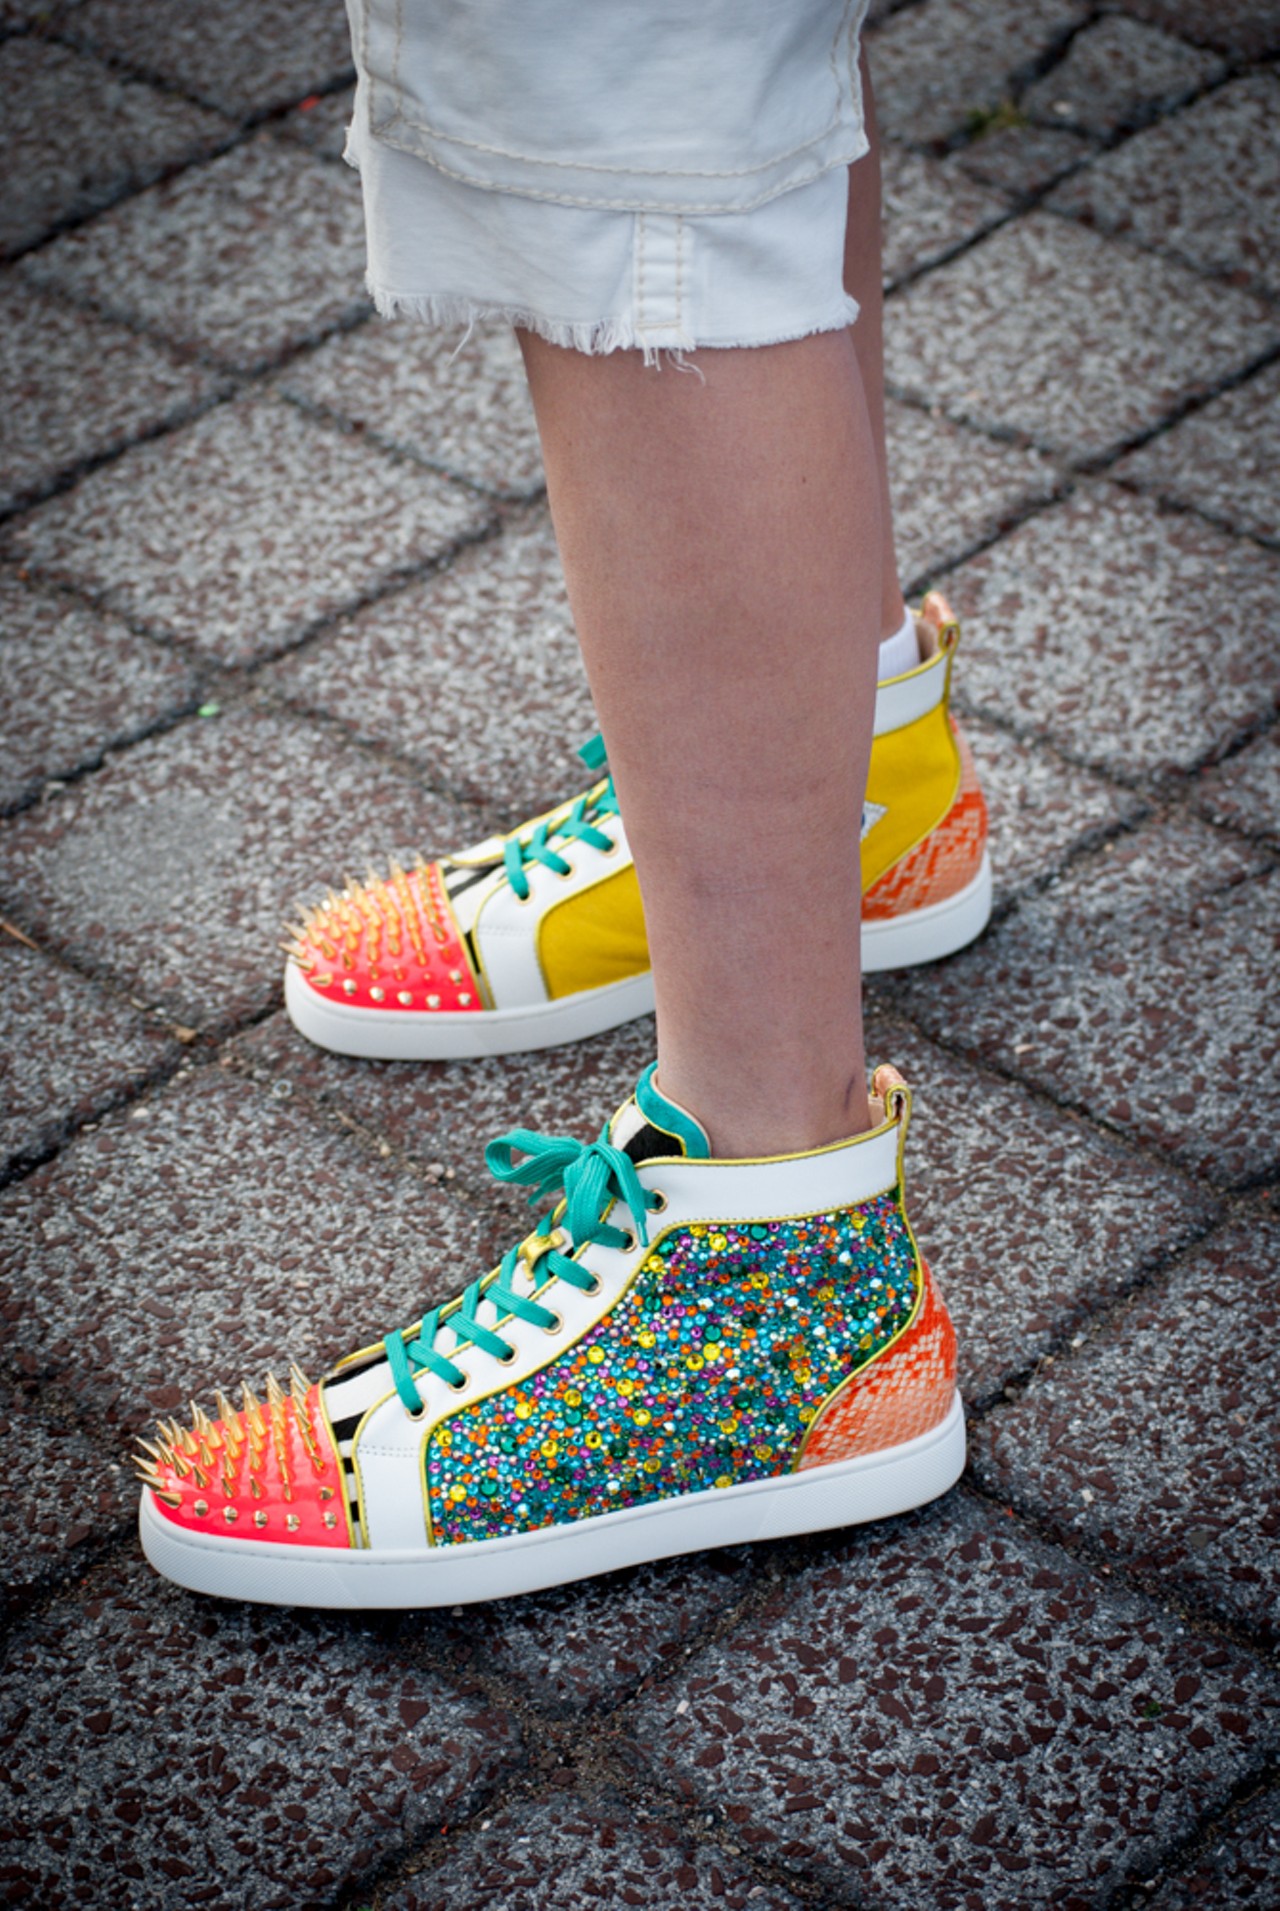 Spikes. Glitter. Bright colors. What's not to love?